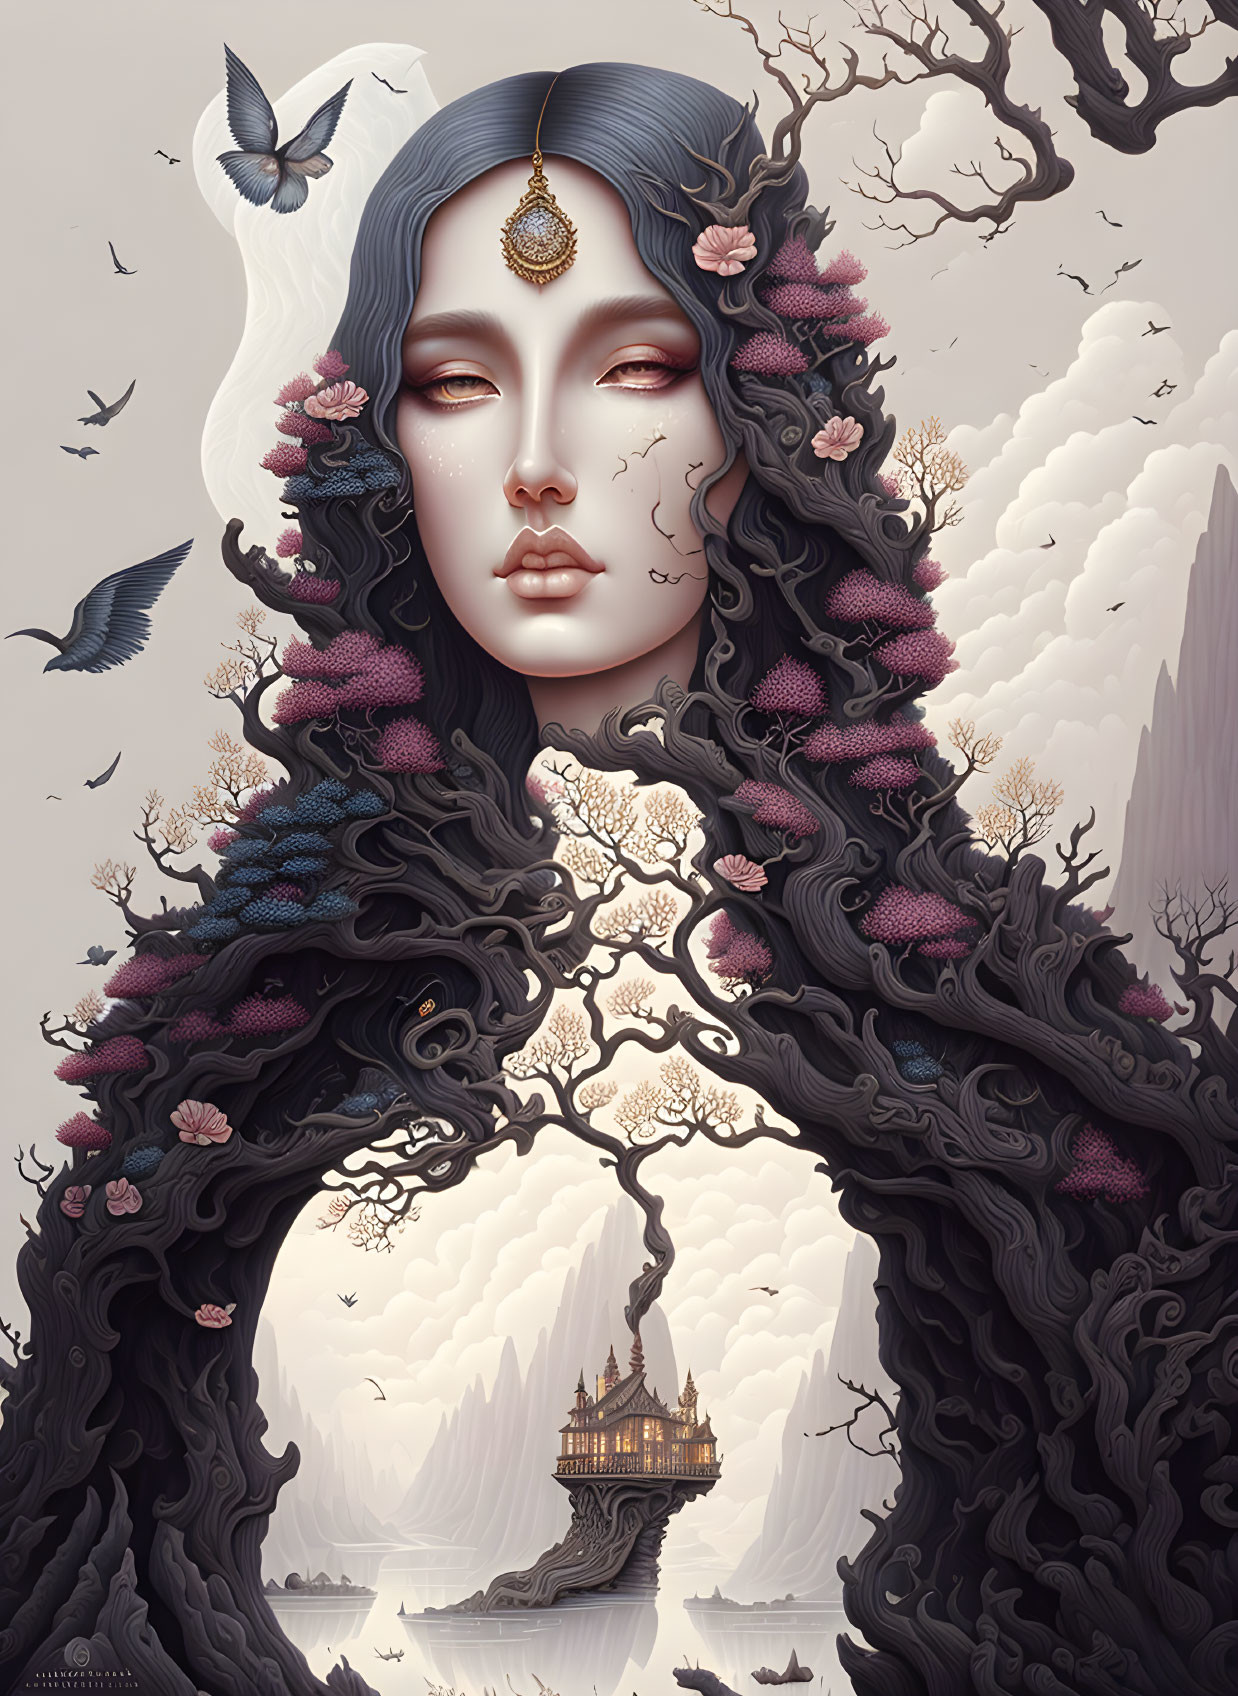 Illustration: Serene woman with dark hair, nature elements, and distant temple.